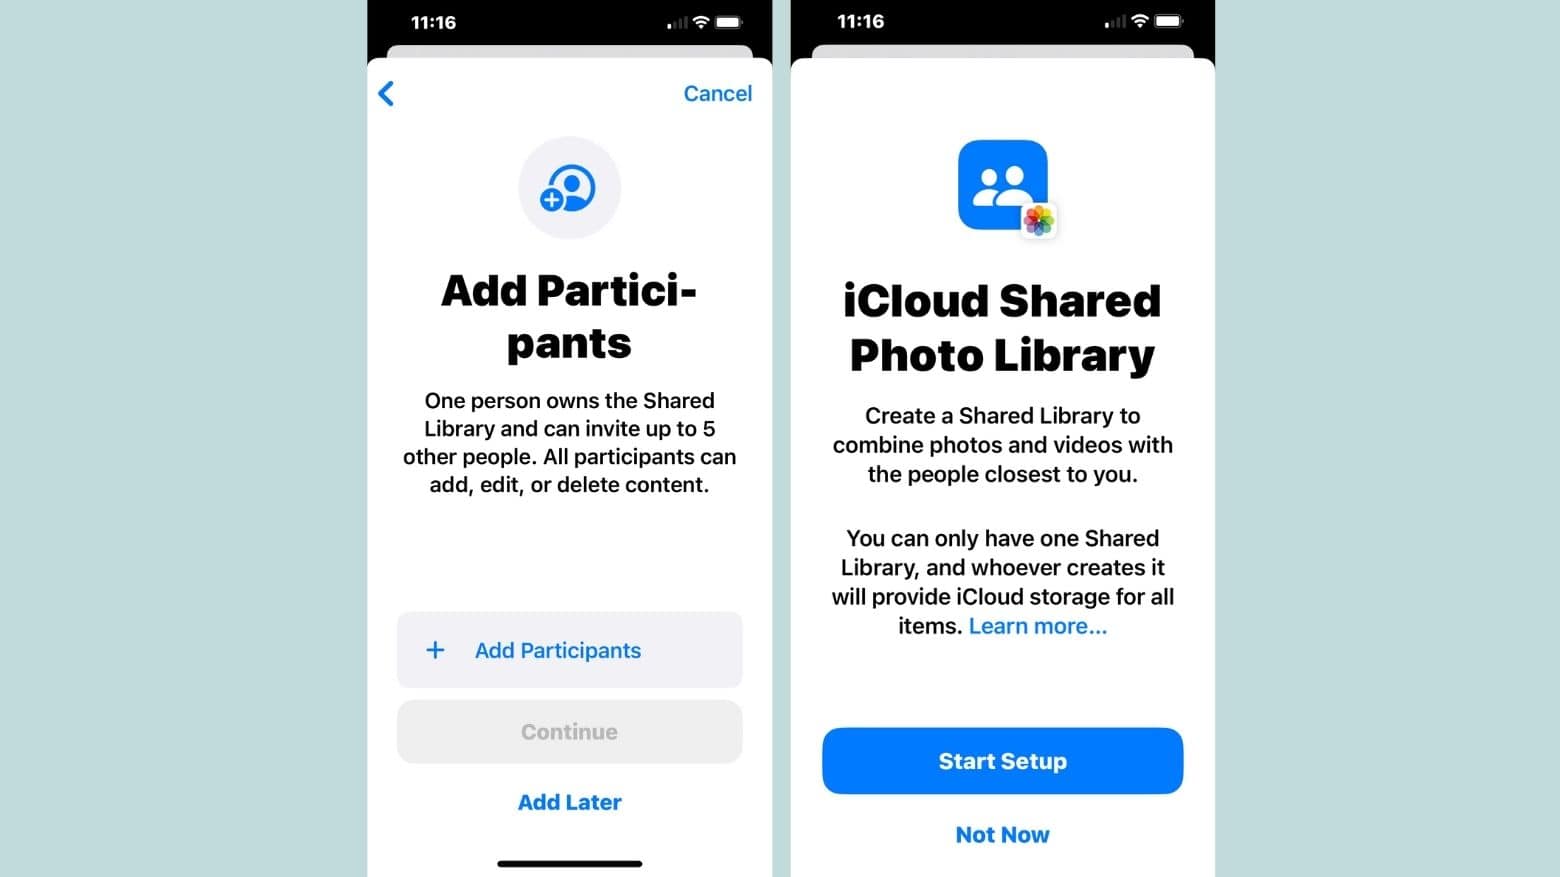 iCloud Shared Photo Library in iOS 16